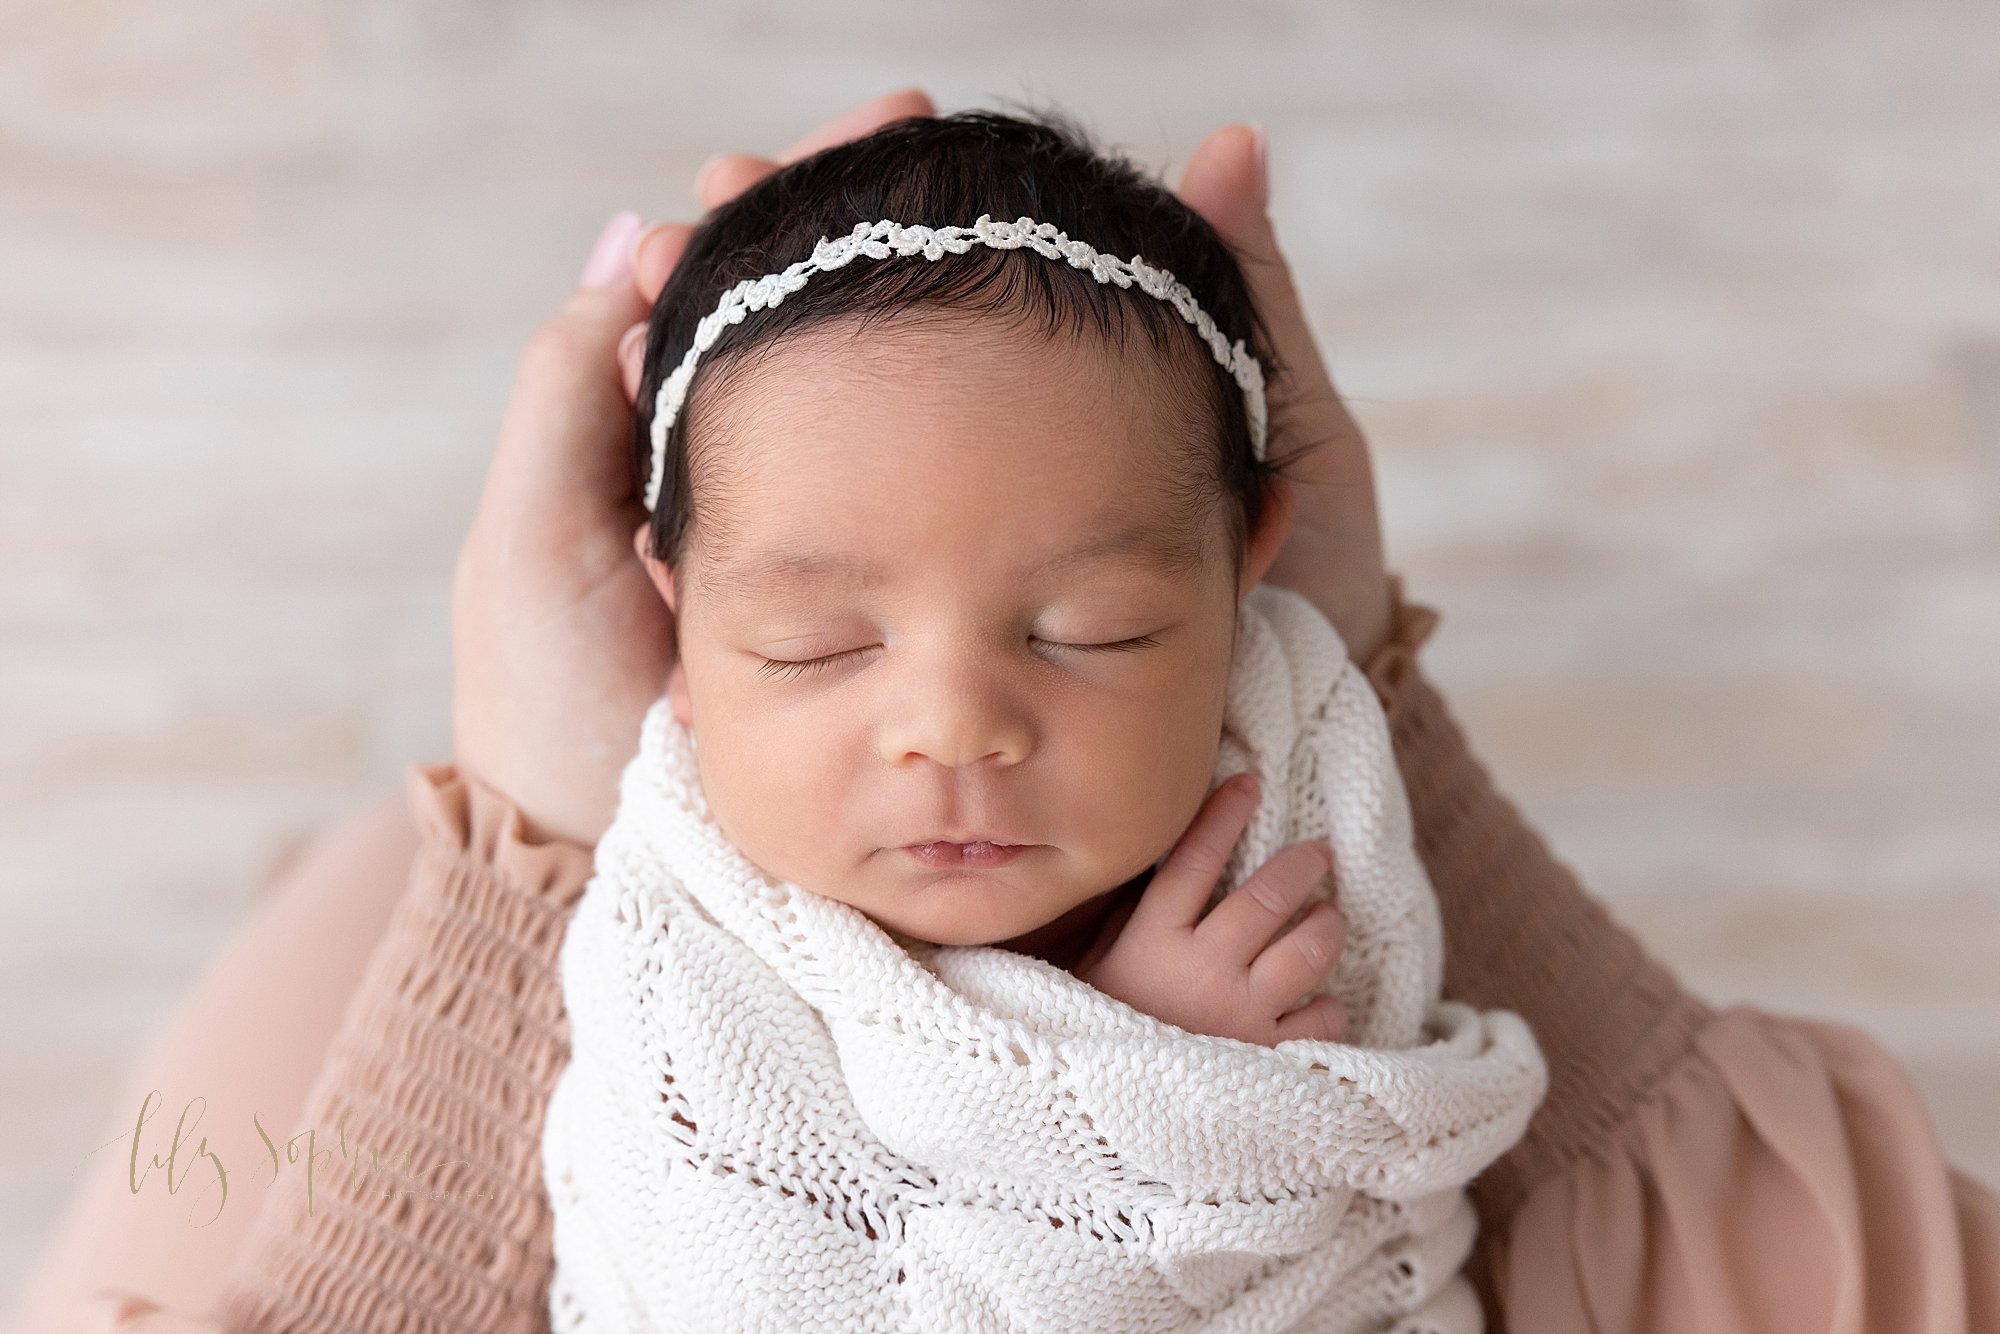  Cloe-up newborn portrait of a newborn baby girl wrapped in a soft white knitted blanket and wearing a delicate headband in her black hair as she peacefully sleeps while her head is held in her mother’s hands taken near Decatur in Atlanta using natur